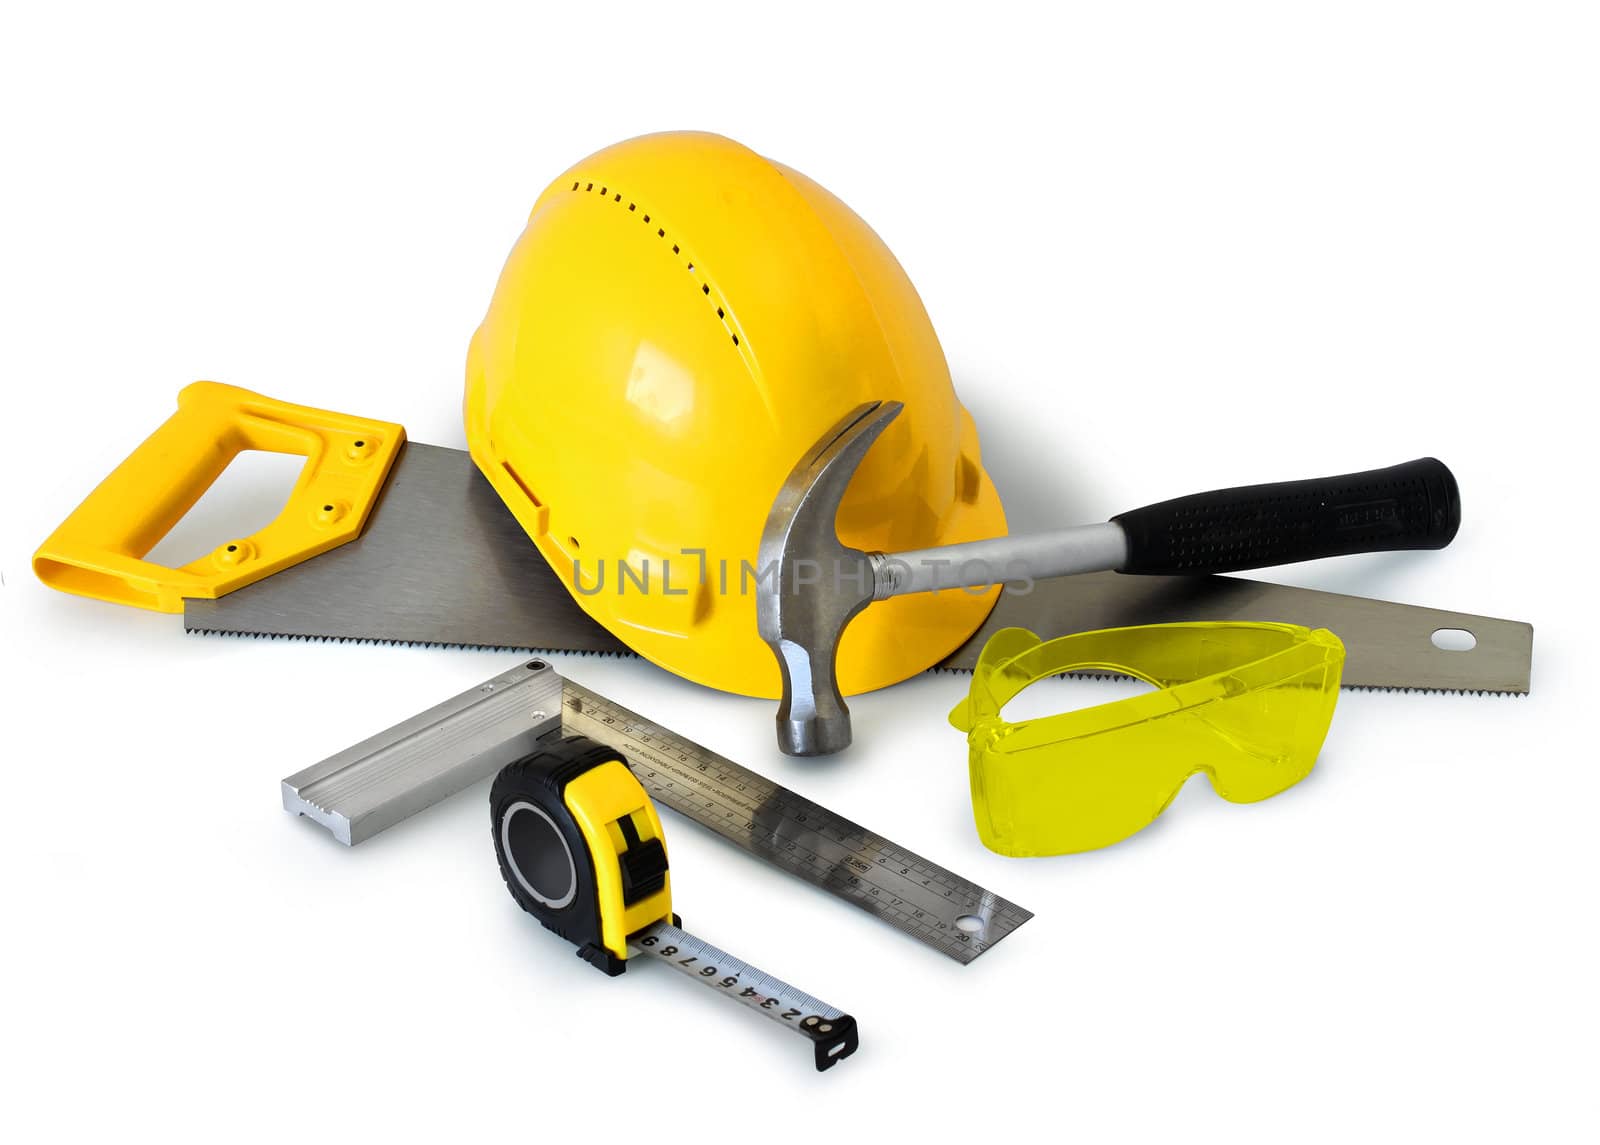 Construction tools gear and safety equipment on white background isolated